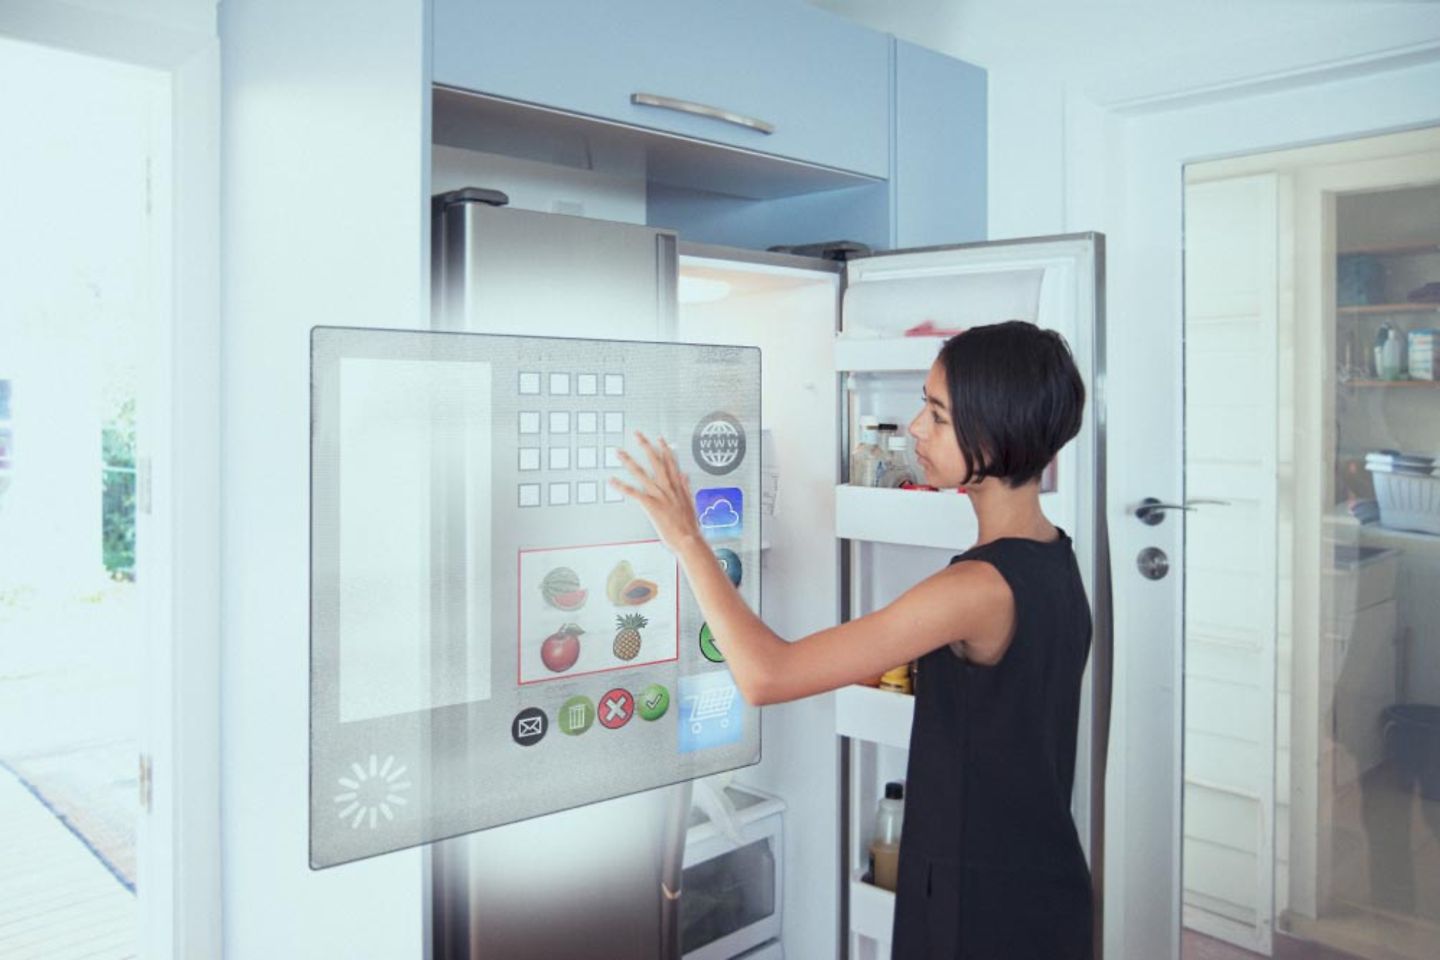 A woman stands in front of a refrigerator with virtual button